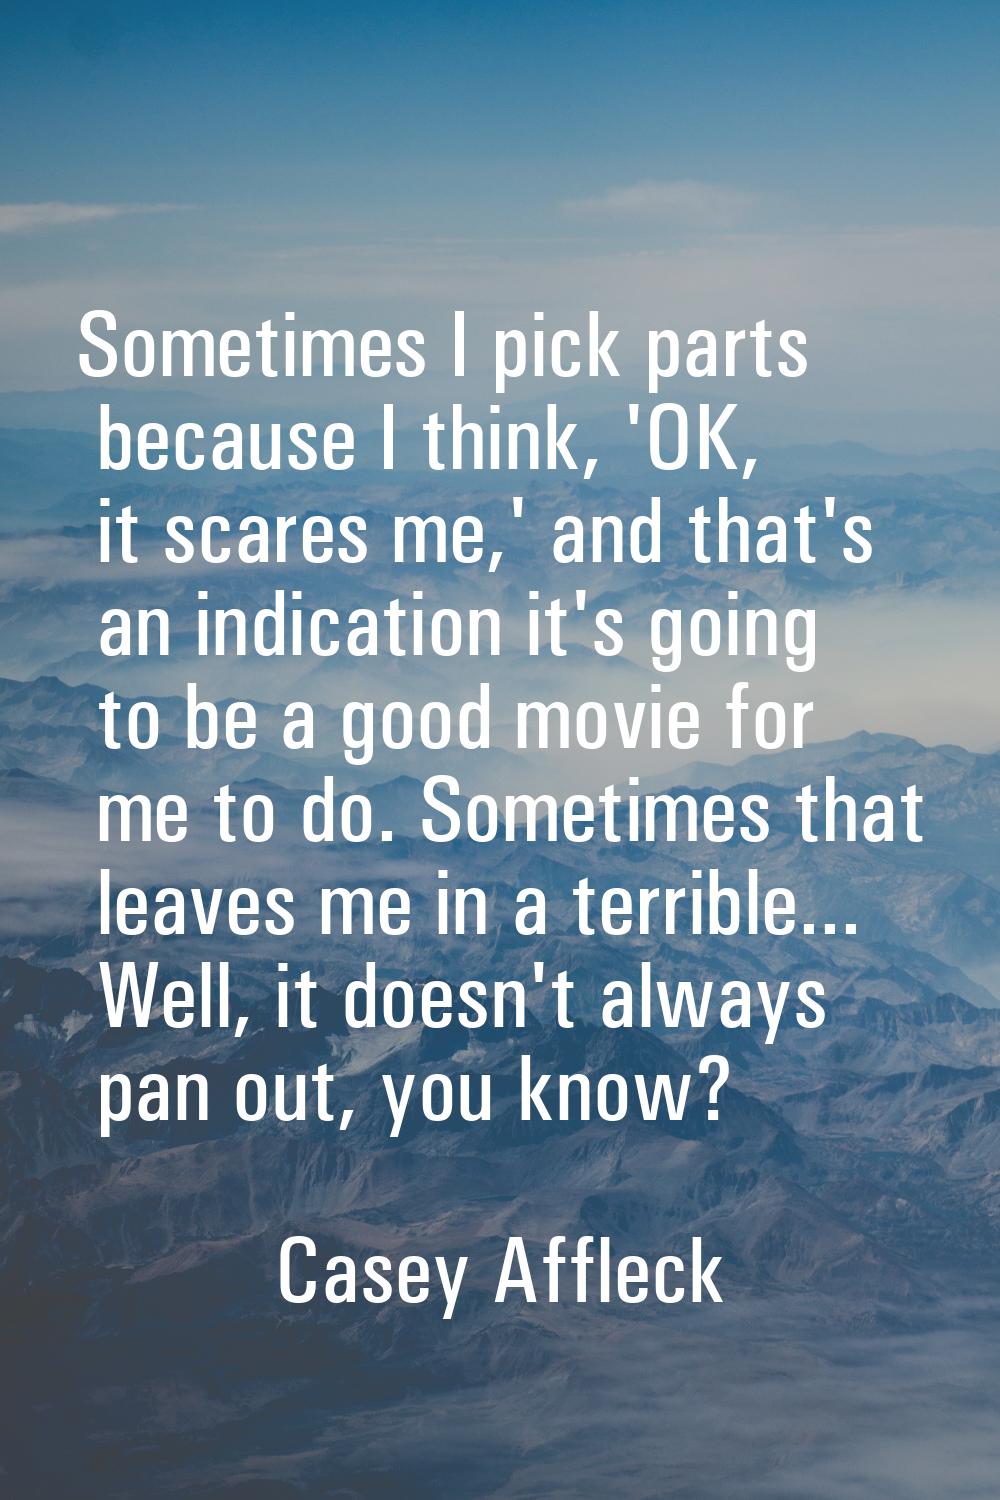 Sometimes I pick parts because I think, 'OK, it scares me,' and that's an indication it's going to 